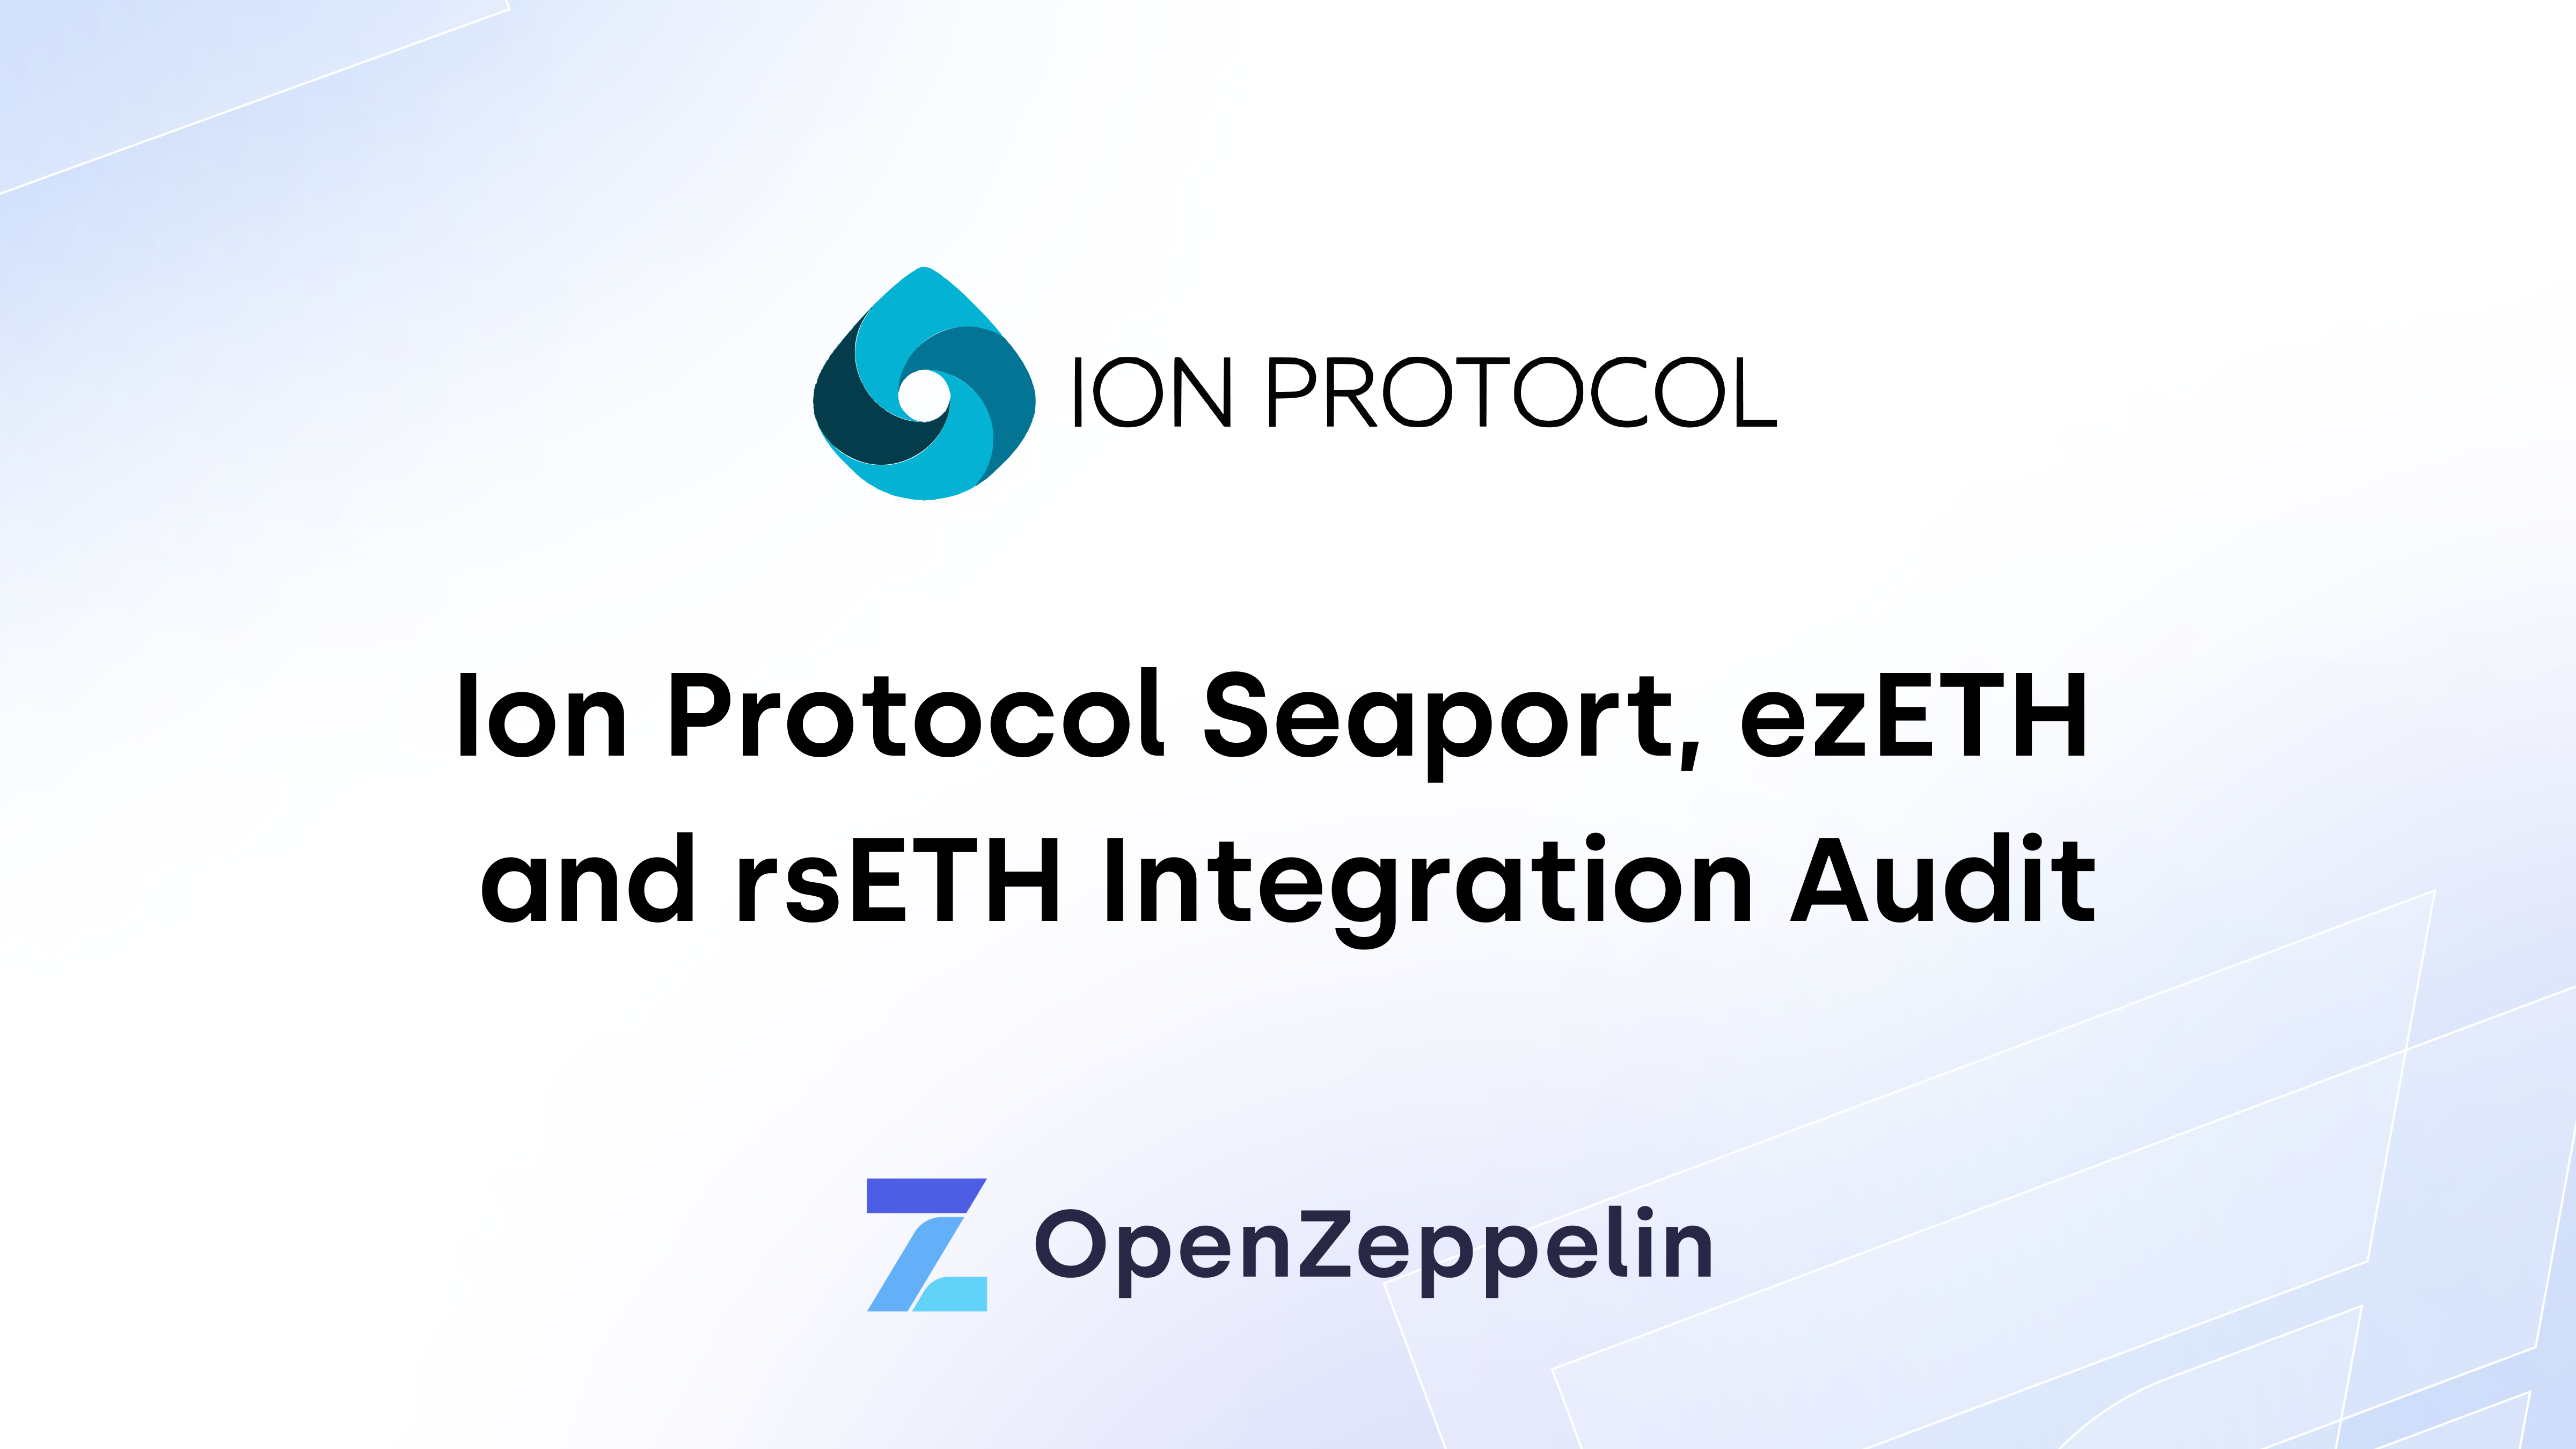 Ion Protocol Seaport, ezETH and rsETH Integration Audit Featured Image